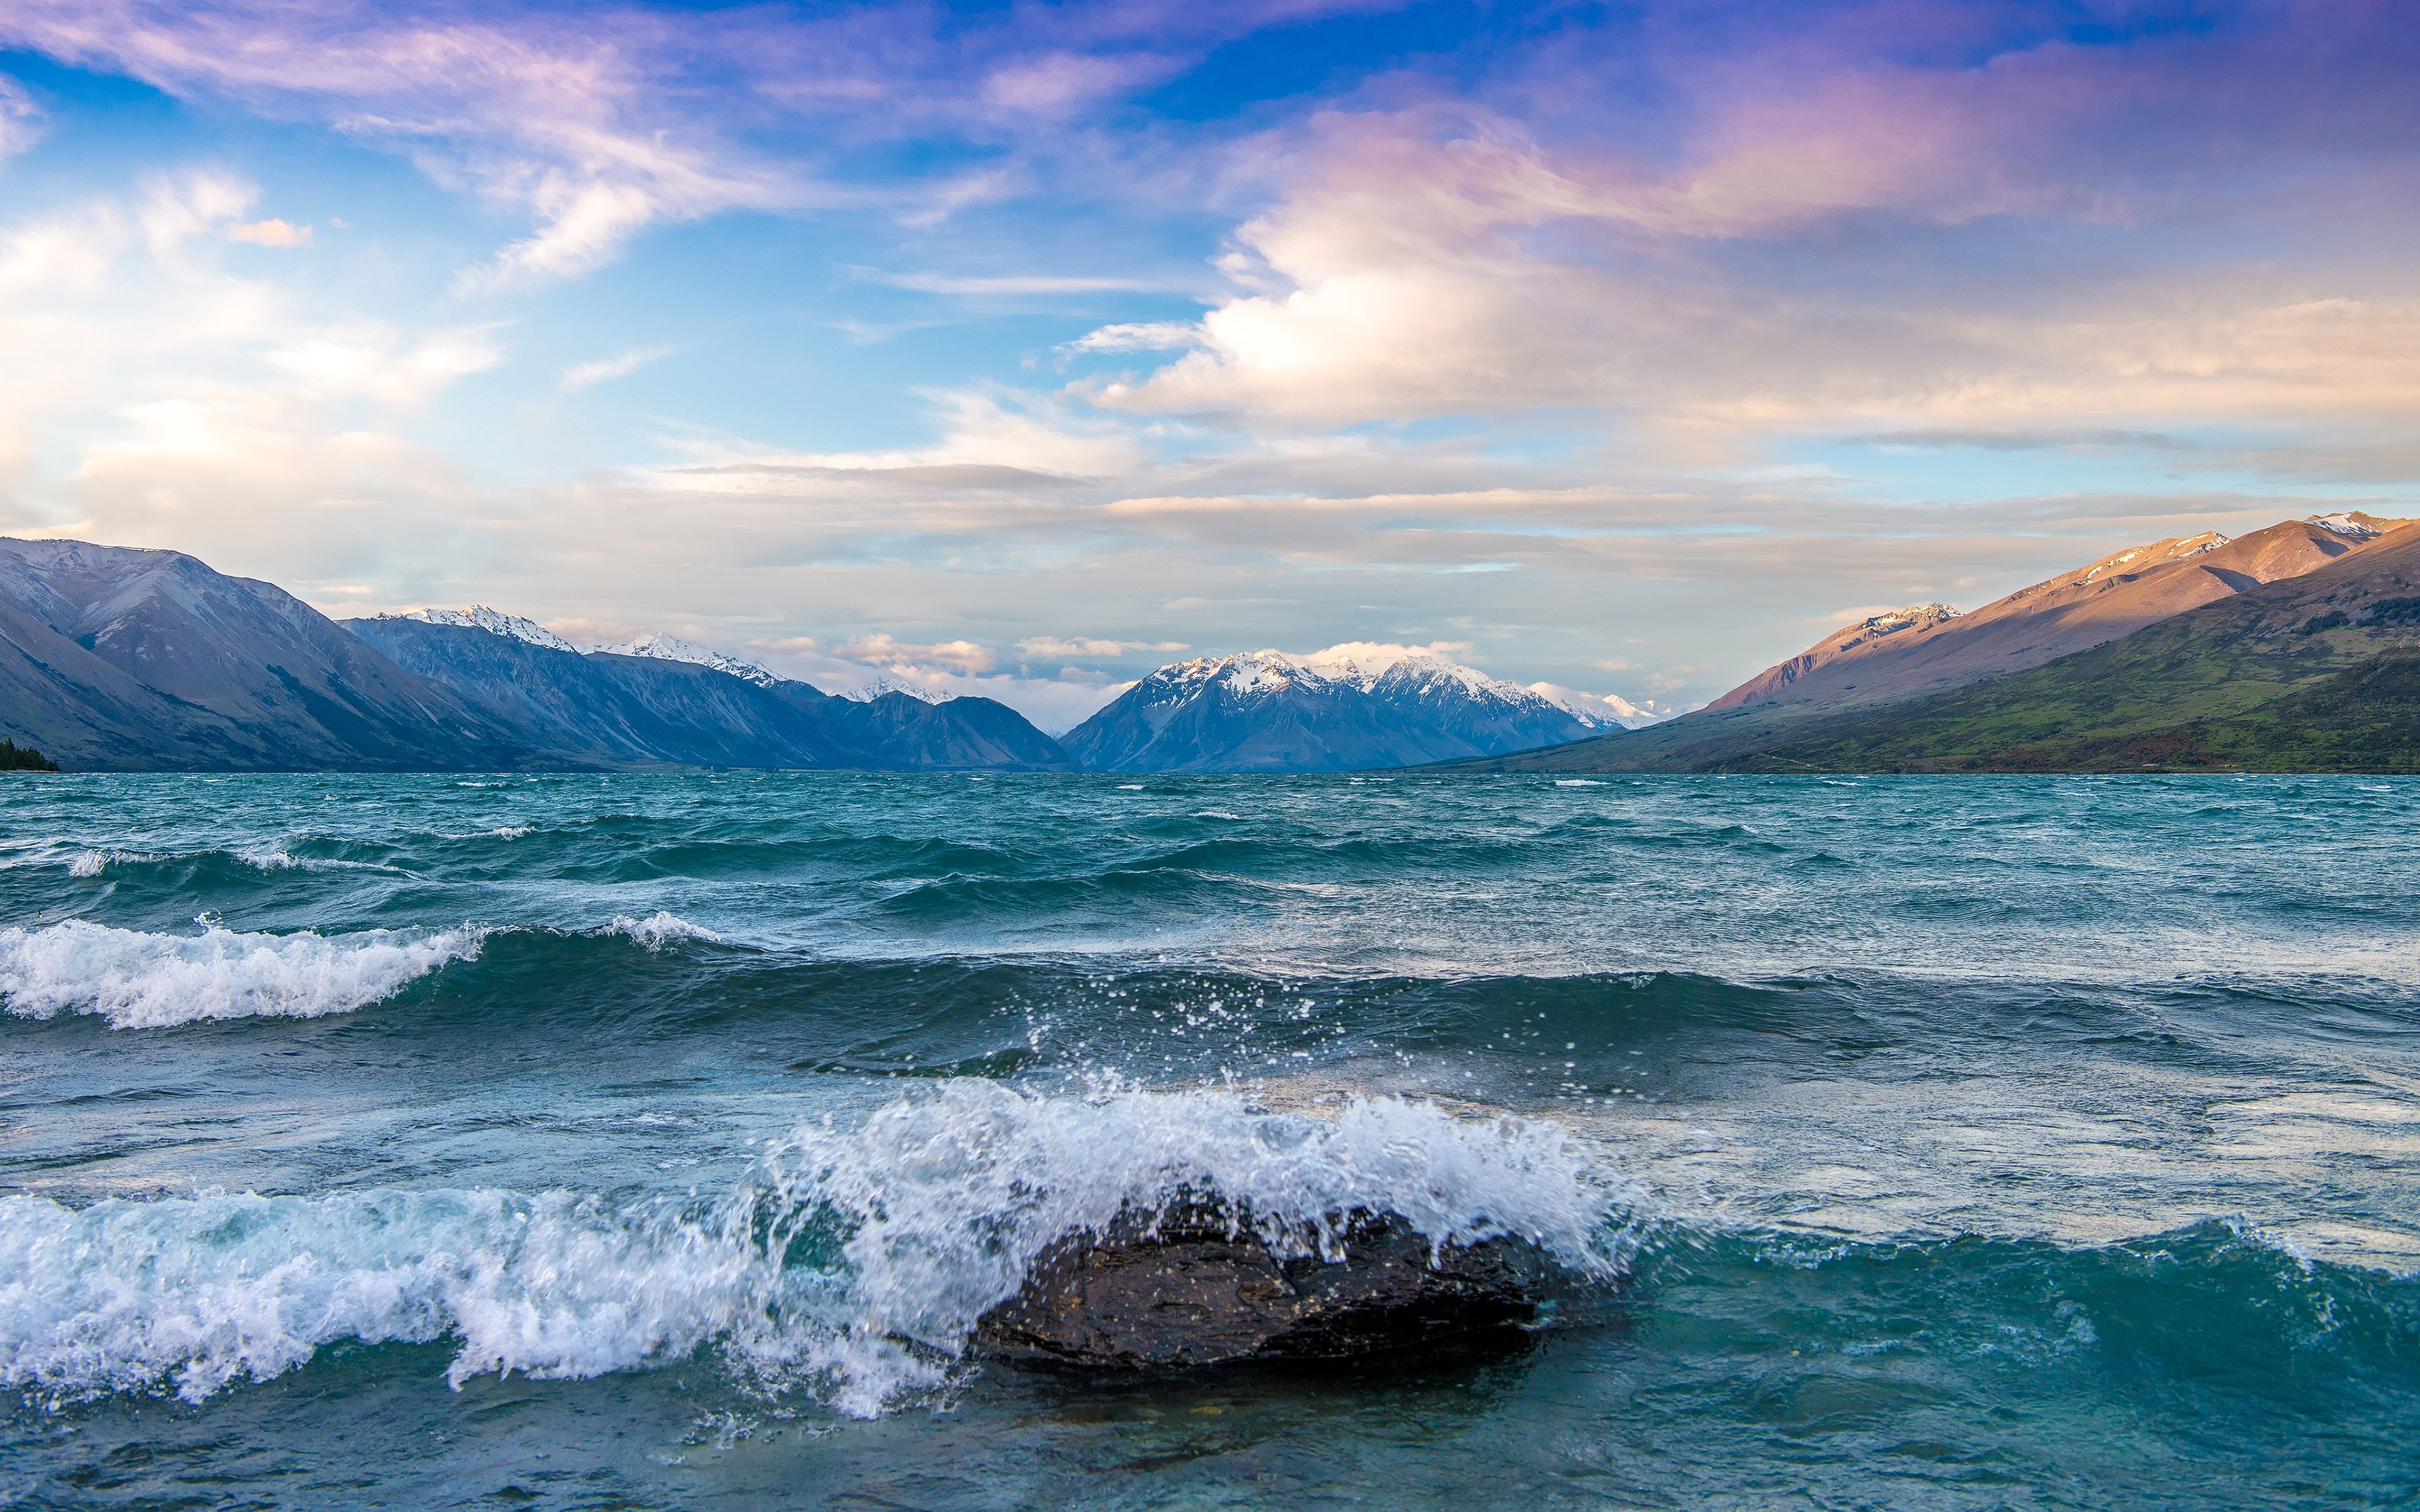 Lake Ohau New Zealand 1440P Resolution HD 4k Wallpaper, Image, Background, Photo and Picture